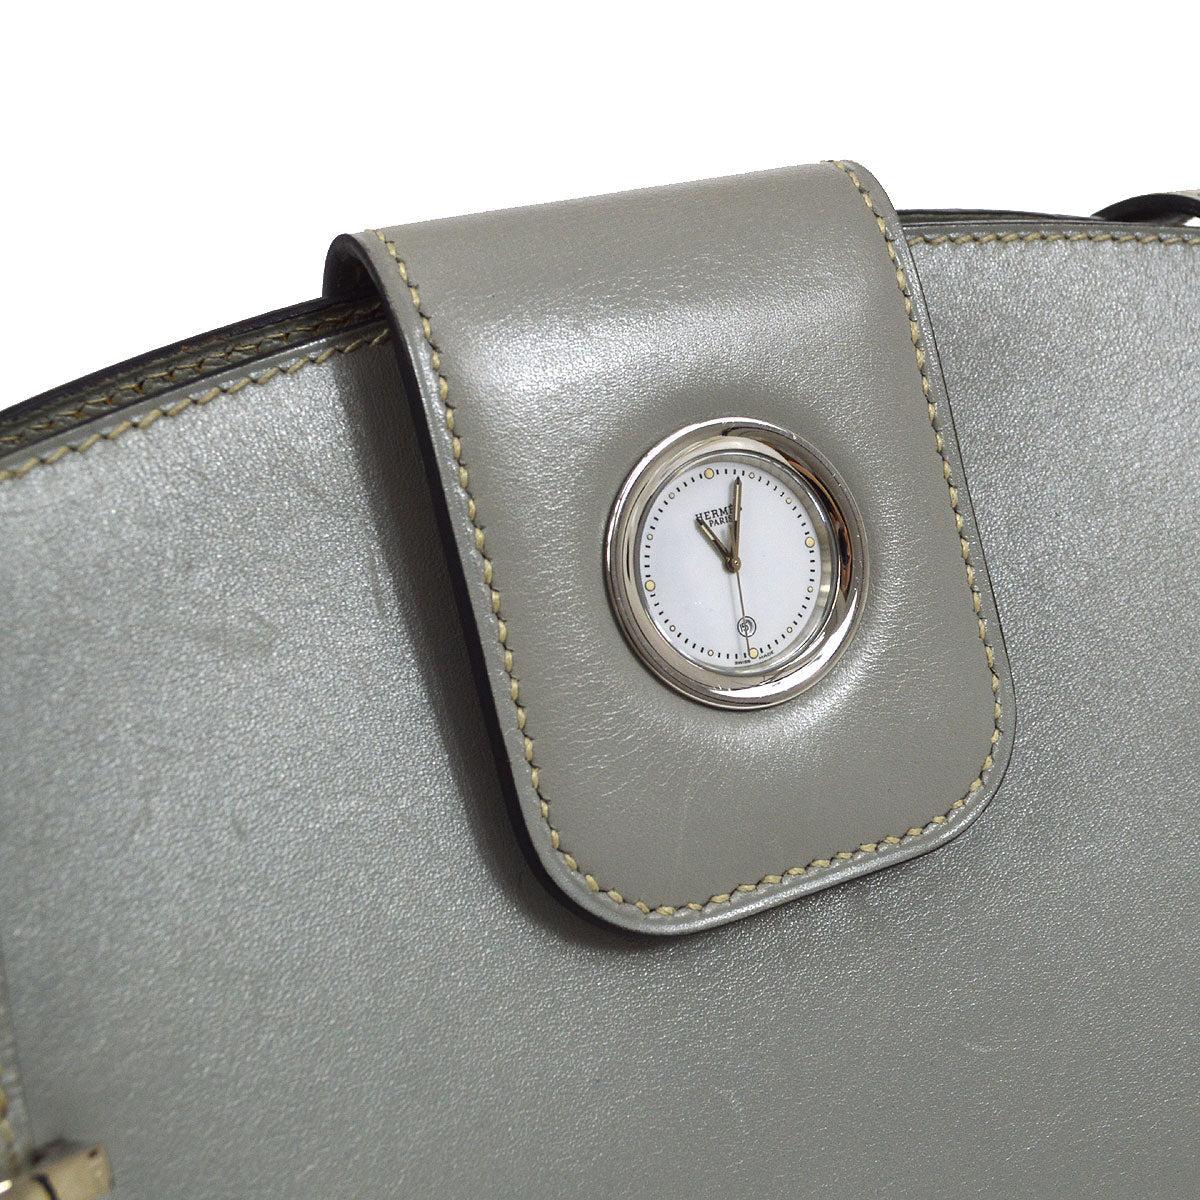 Pre-Owned Vintage Condition
From 1999 Collection
Box Calfskin Leather
Palladium Hardware
Leather Lining
Measures 11.75